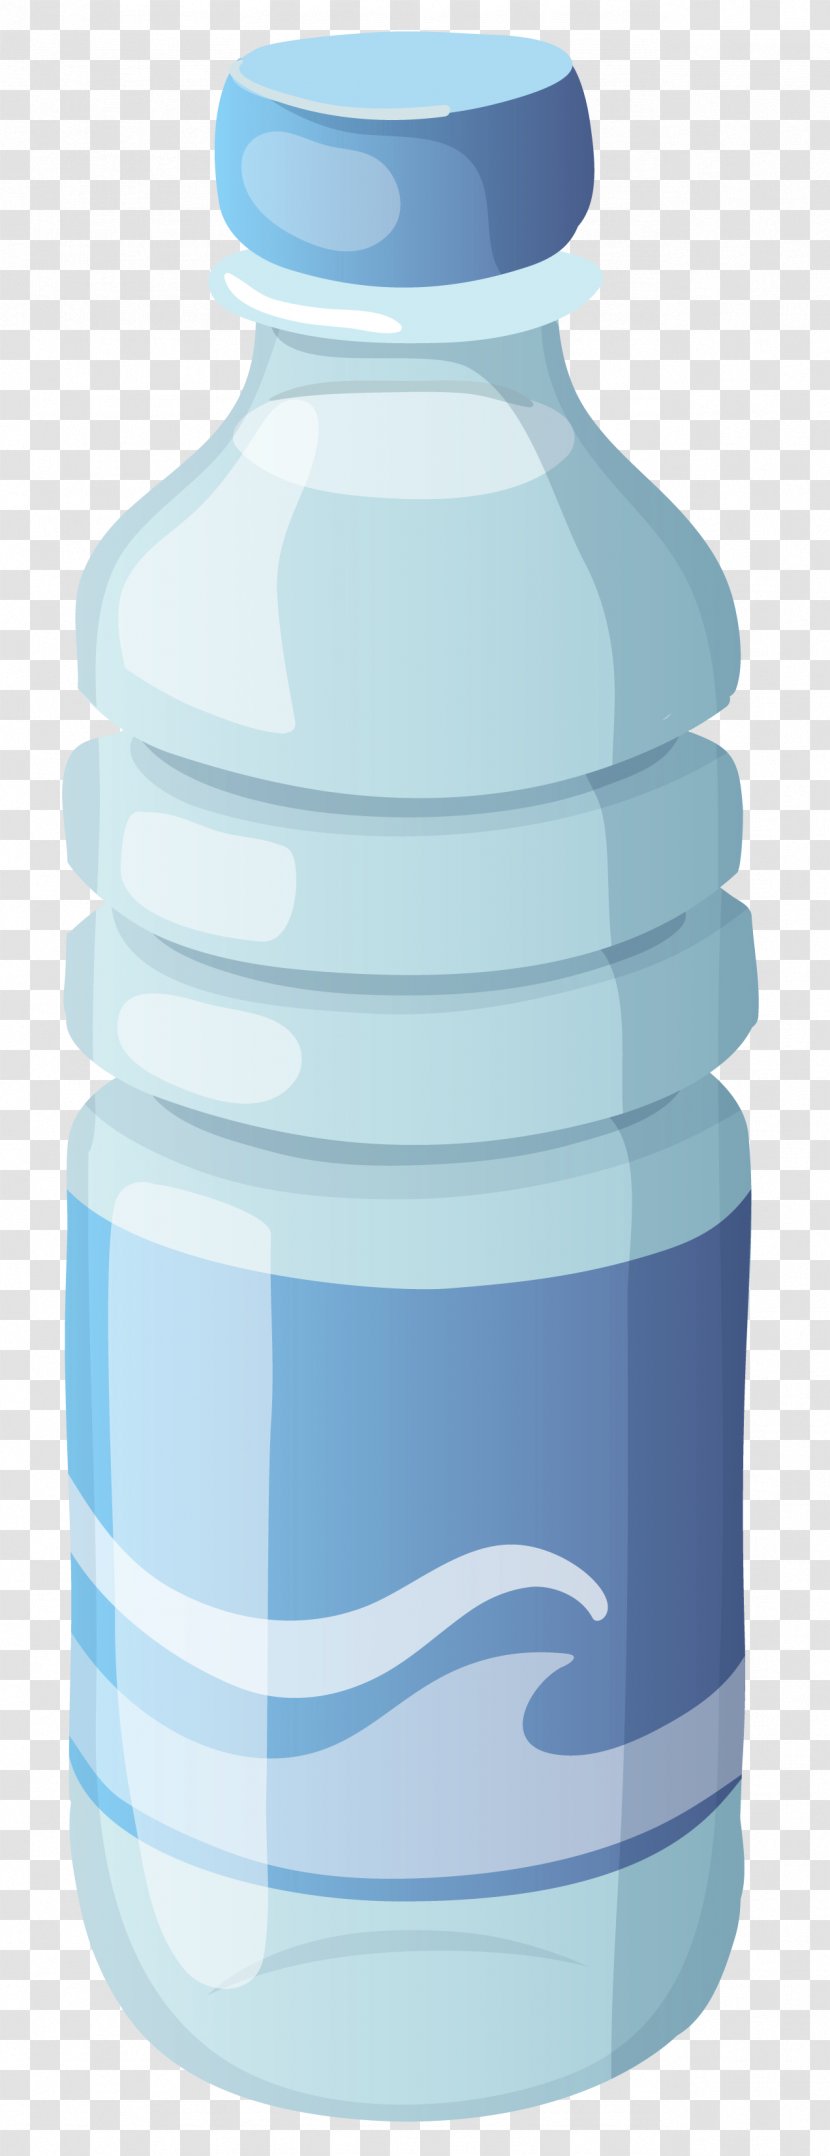 Water Bottle Bottled Clip Art - Drinkware - Small Mineral Clipart Image Transparent PNG